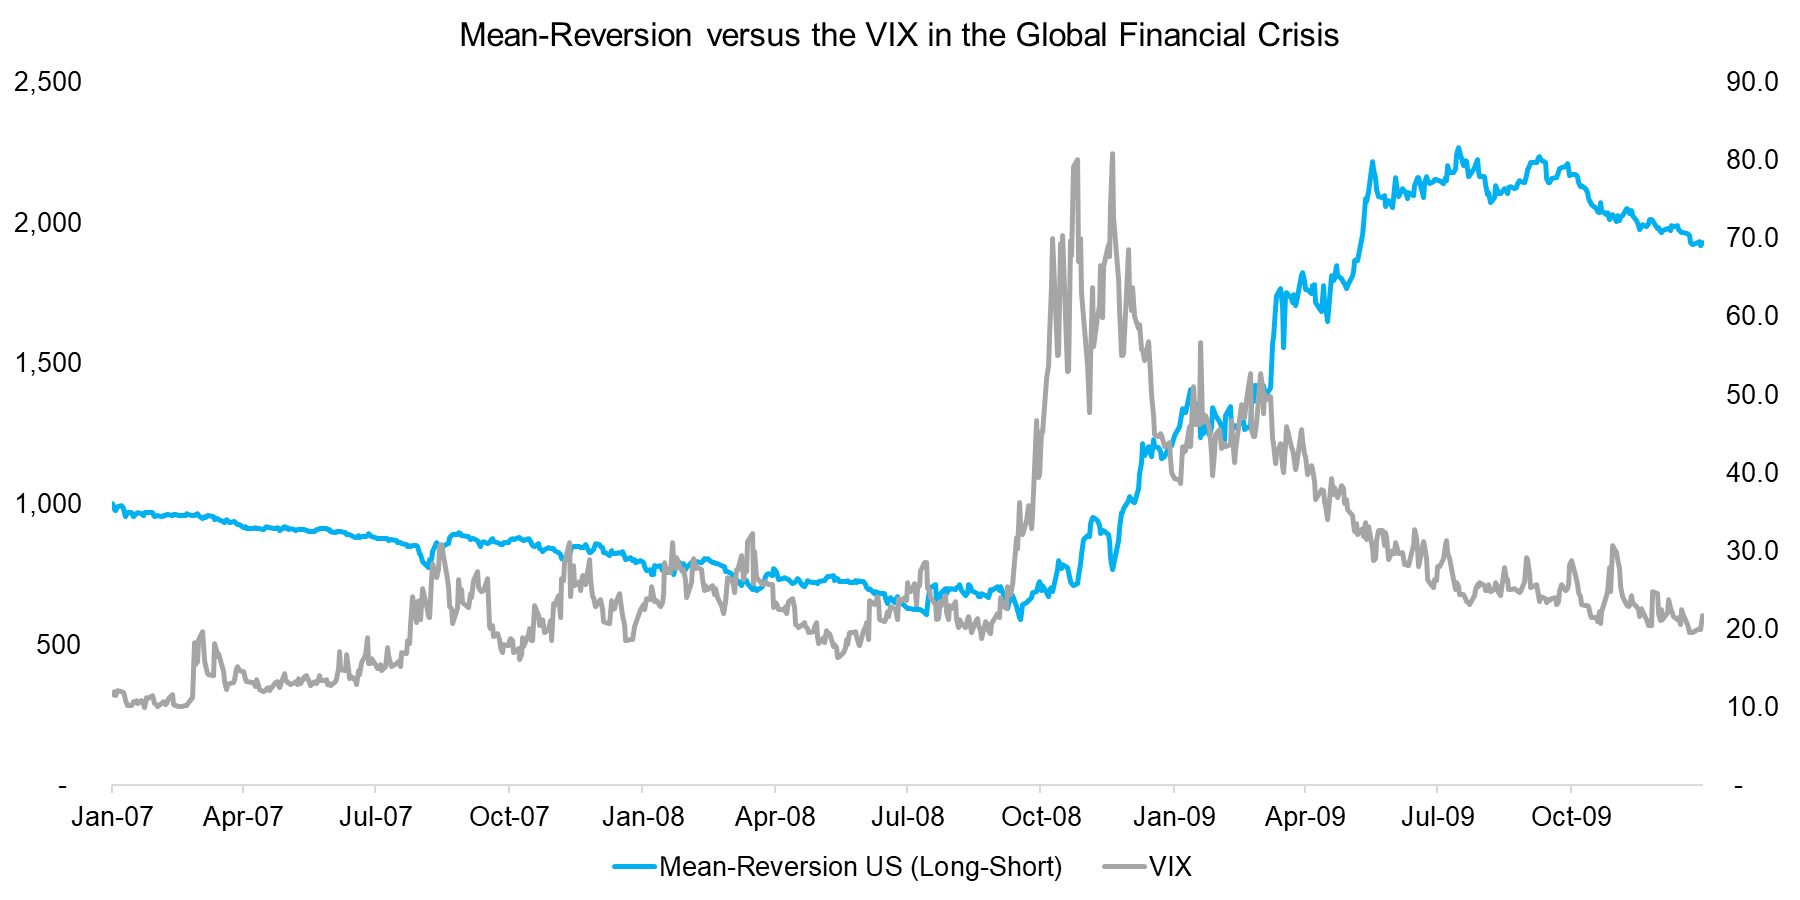 Mean-Reversion versus the VIX in the Global Financial Crisis